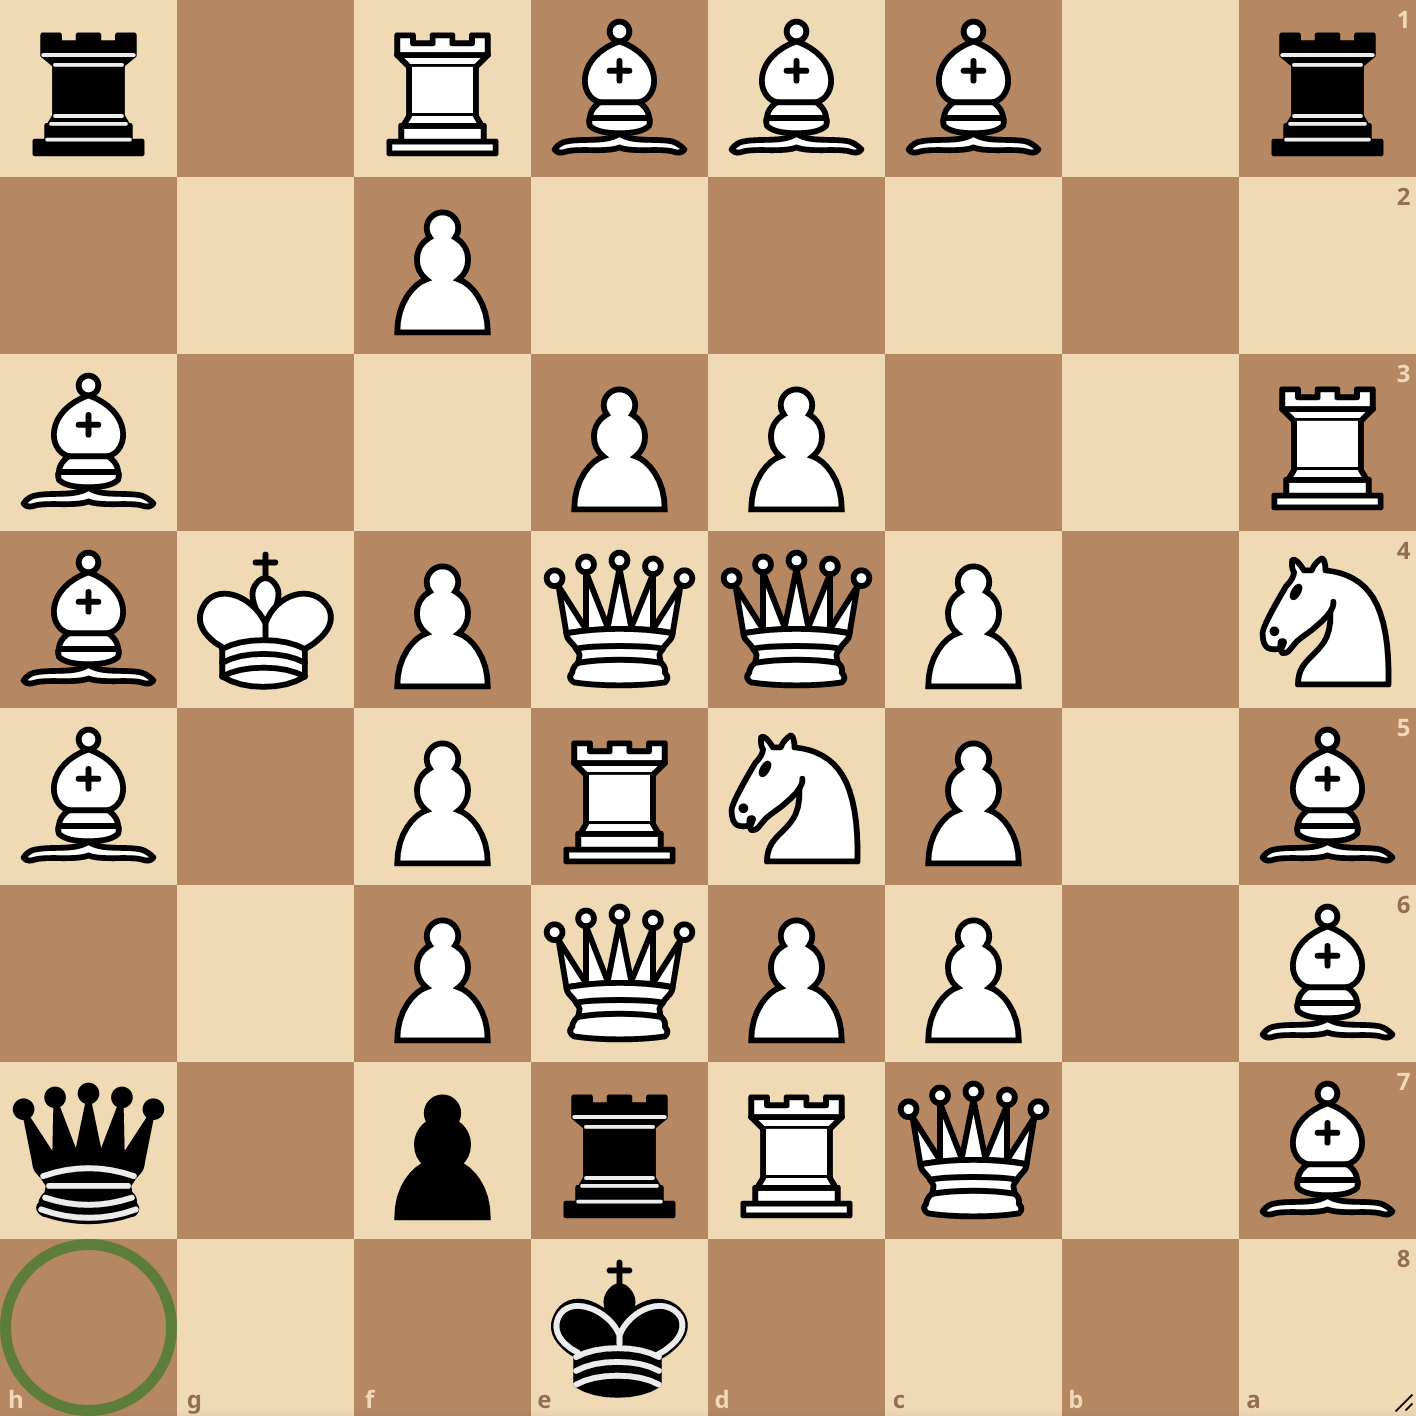 A chess board with a1 at the top right. A green circle marks h8. The board's FEN is below.